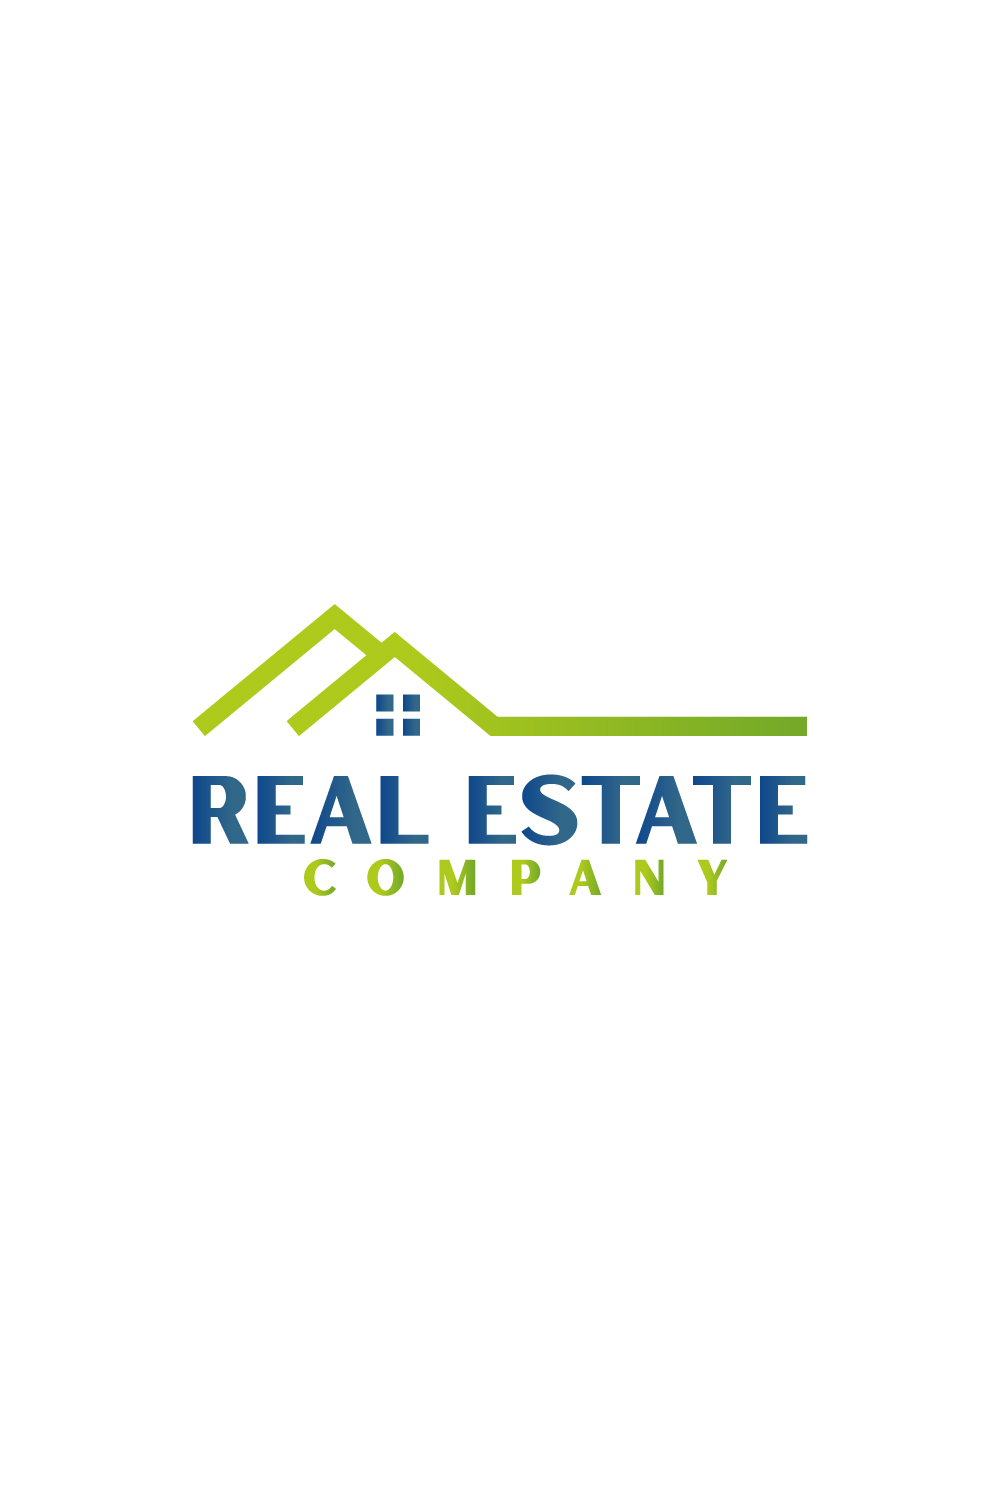 Real estate logo with green, dark blue color pinterest preview image.